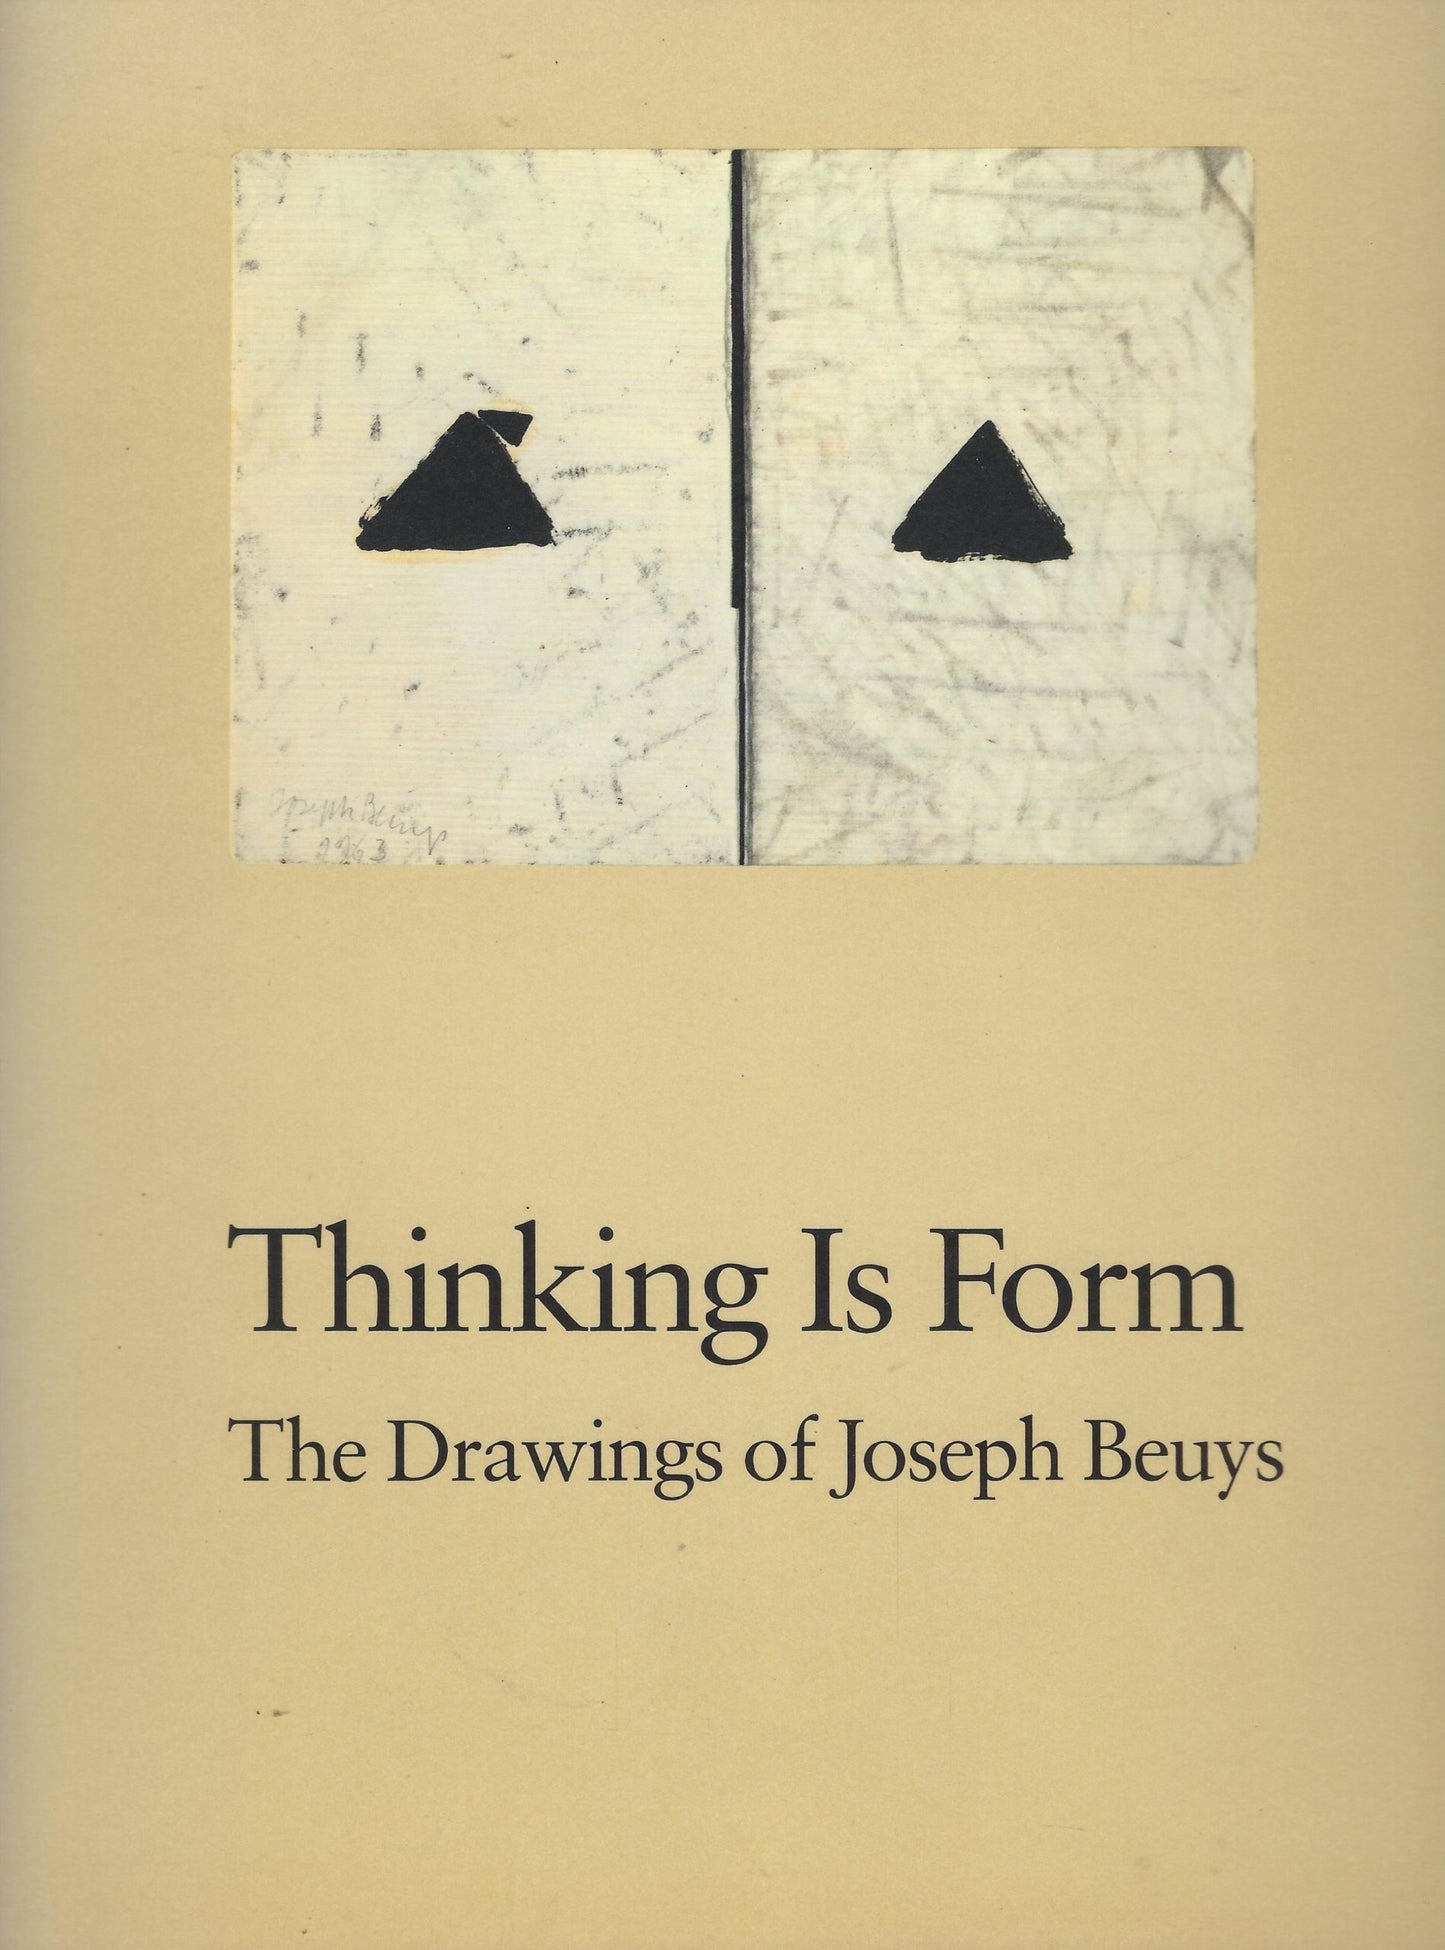 Thinking is form, the drawings of Joseph Beuys